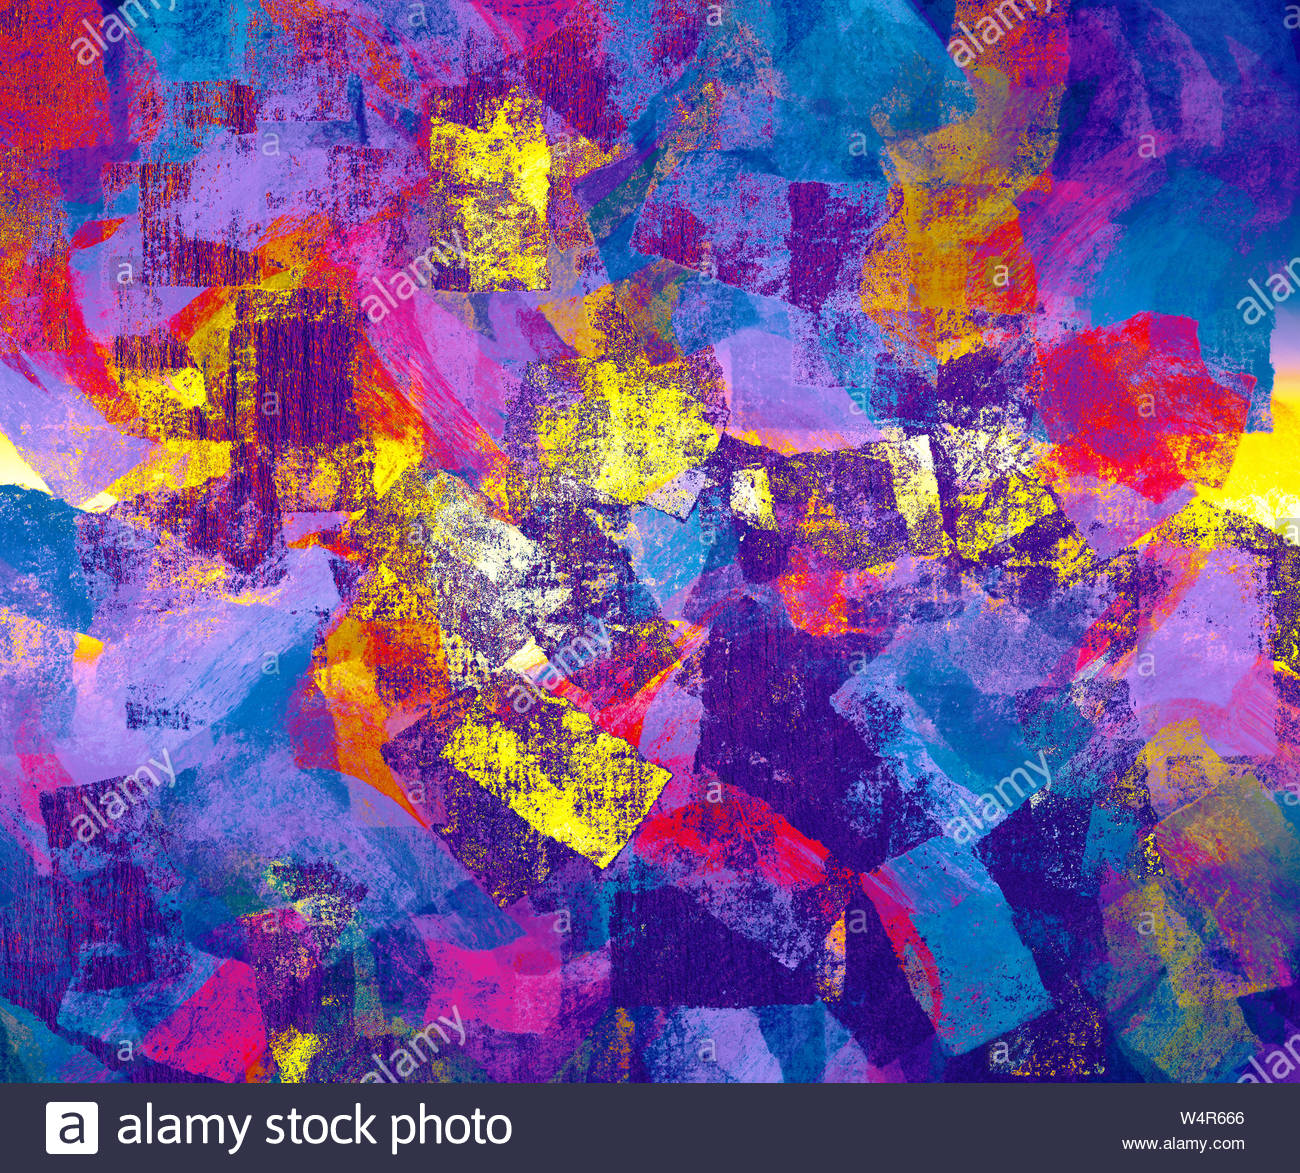 Abstract Printed Background Grunge Brush Strokes Artwork